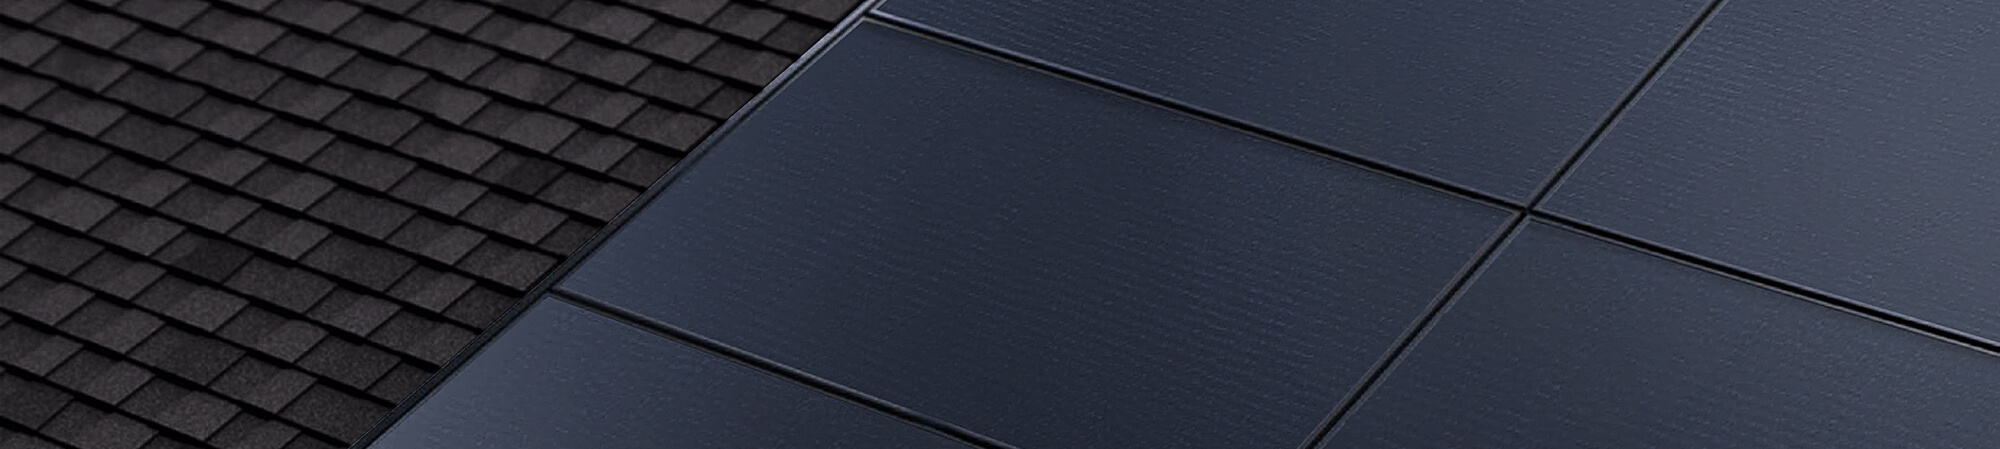 Up close view of solar panels on roof rendering